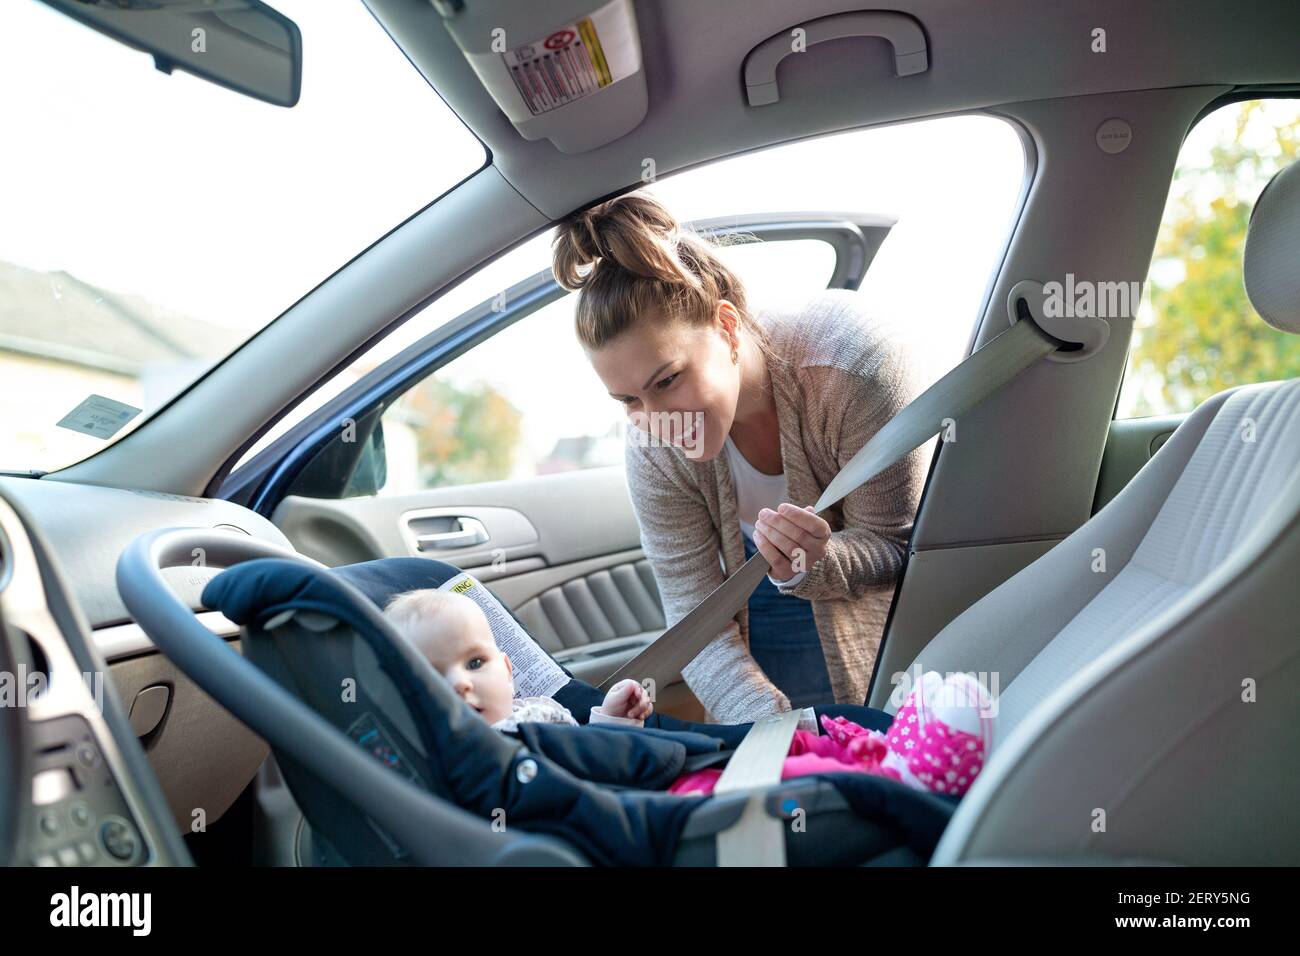 Putting on the seatbelt is important especially if a traveling companion is child of your own Stock Photo